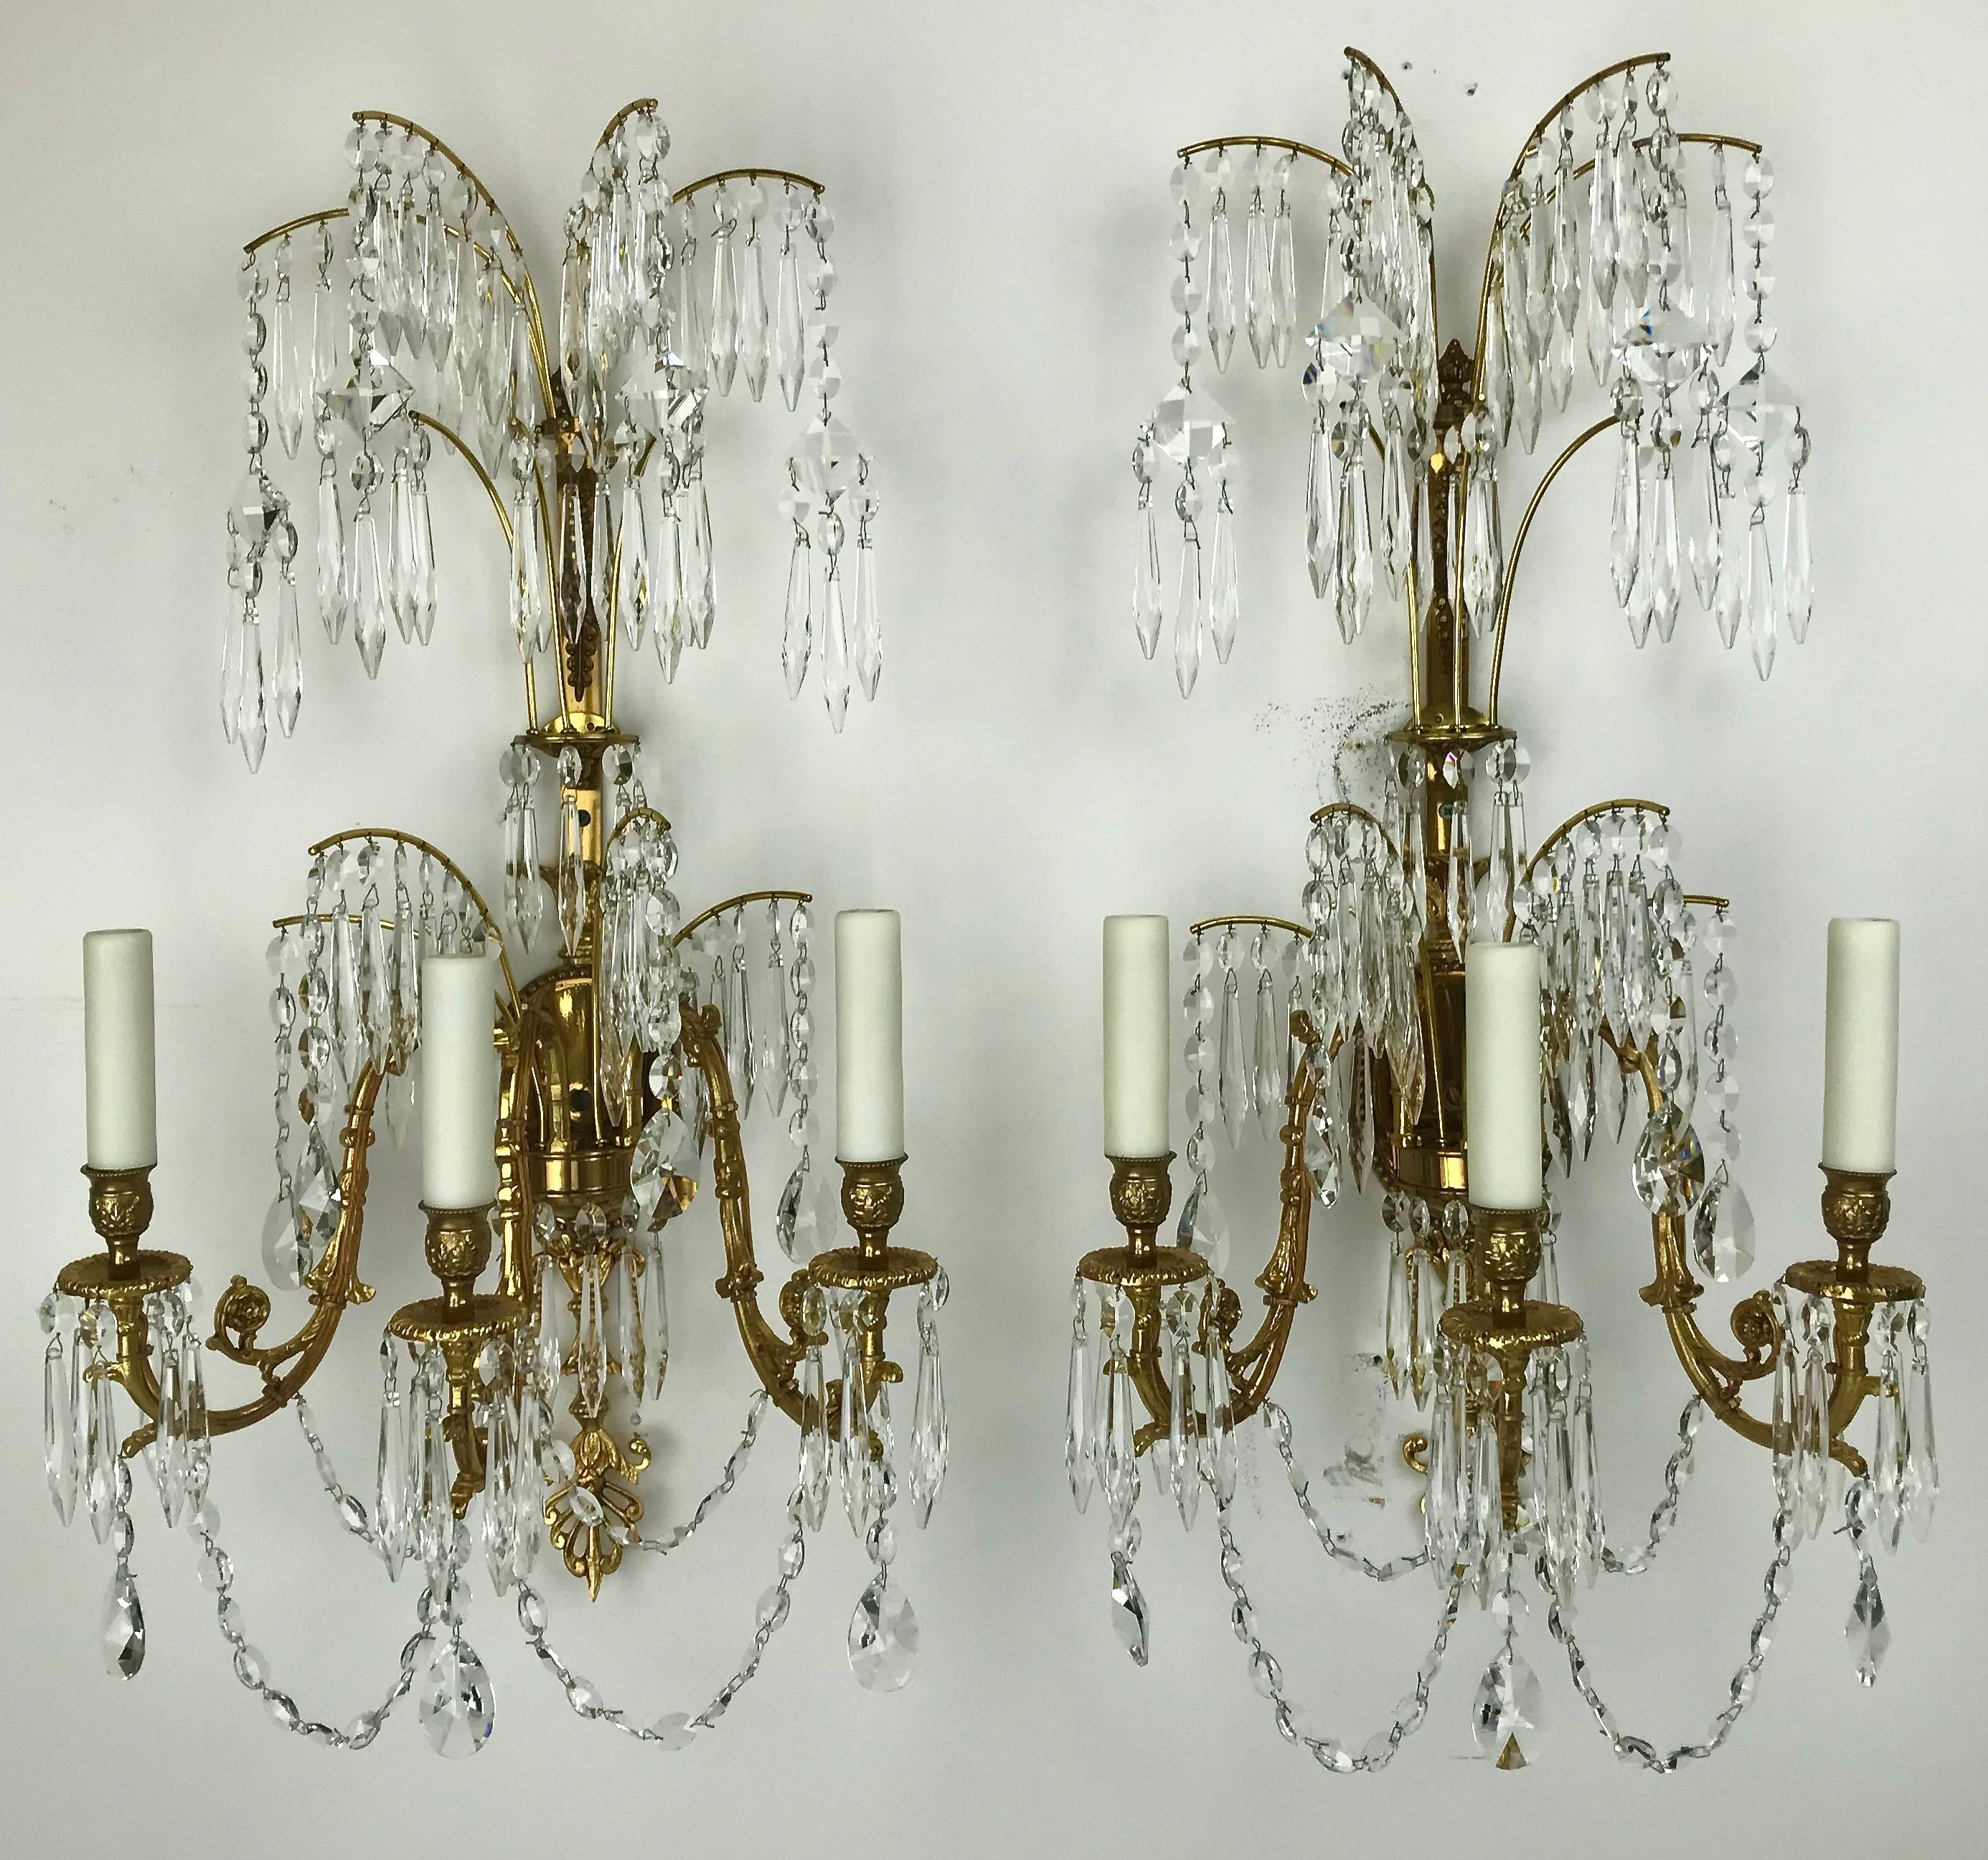 This handsome set of four sconces feature cut crystal swags, pendants, and
crystal fringed branch form elements.